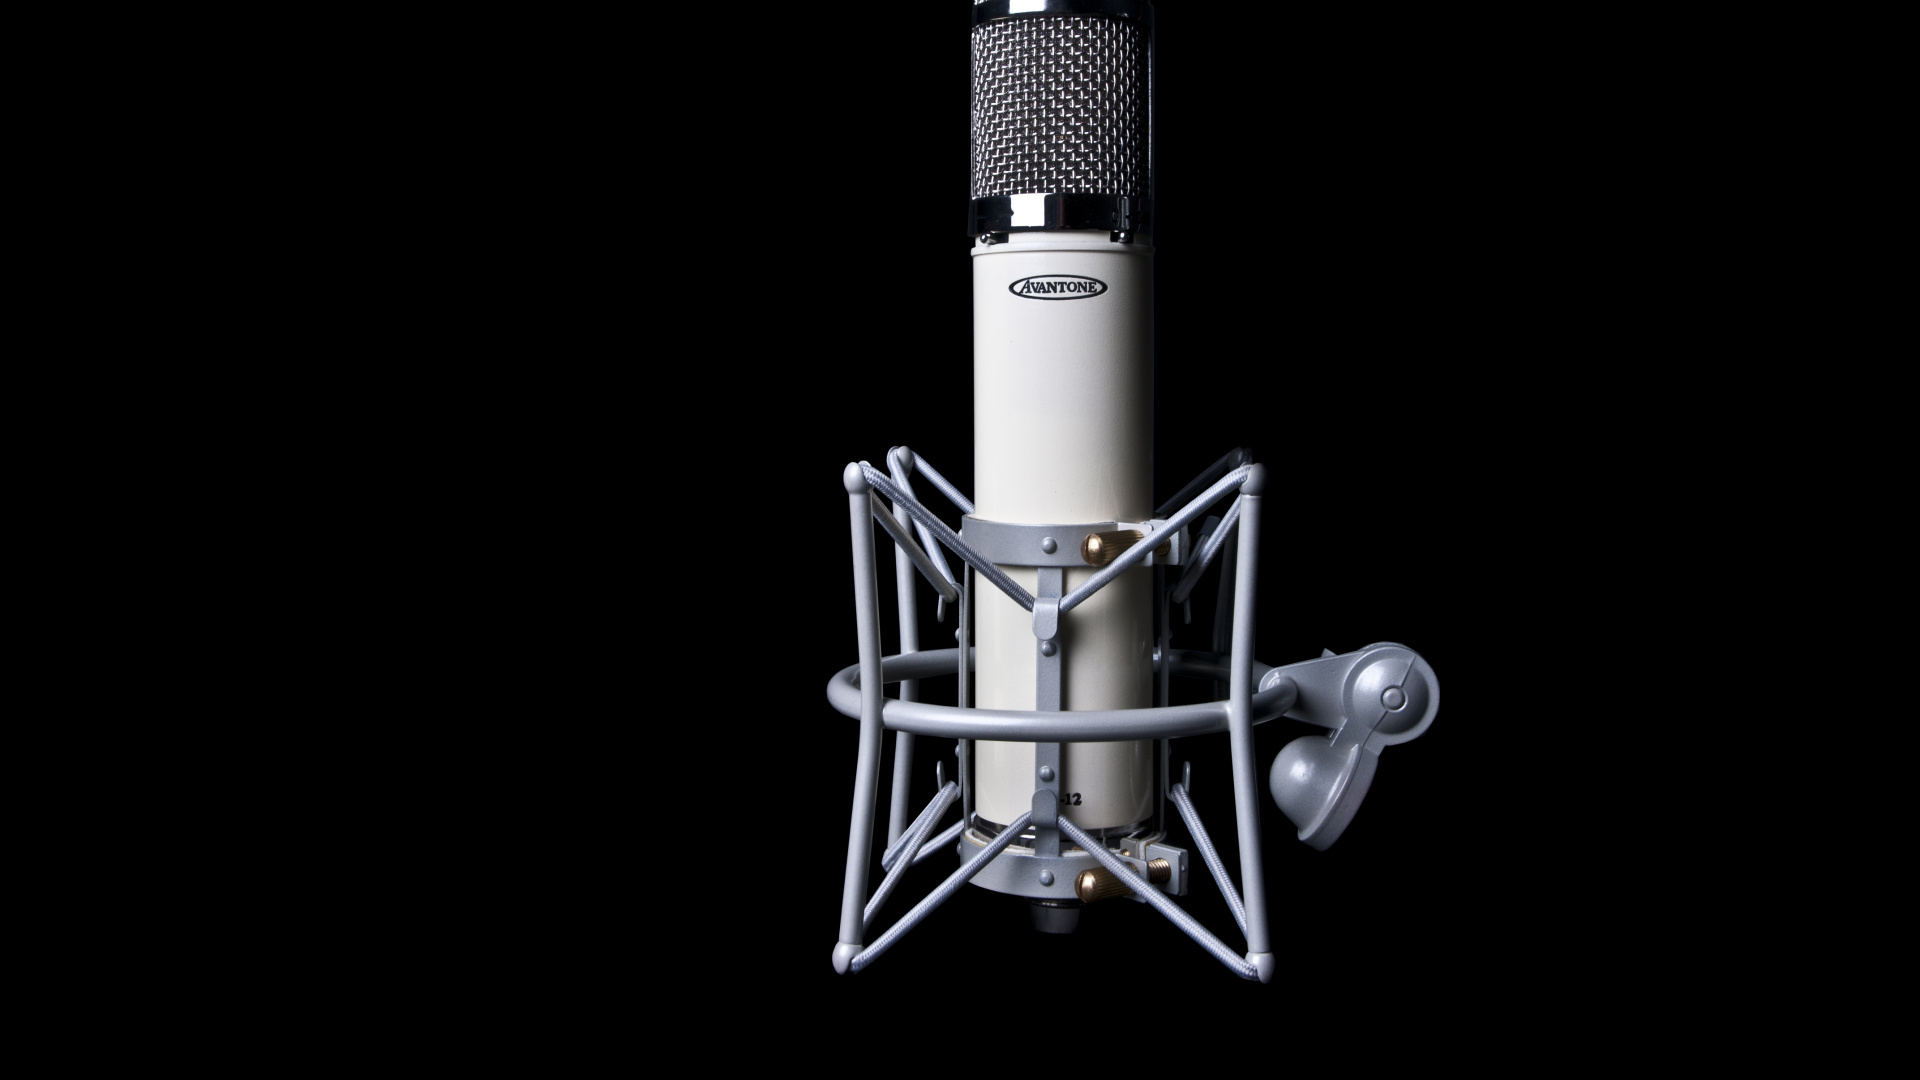 Black and Silver Condenser Microphone. Wallpaper in 1920x1080 Resolution